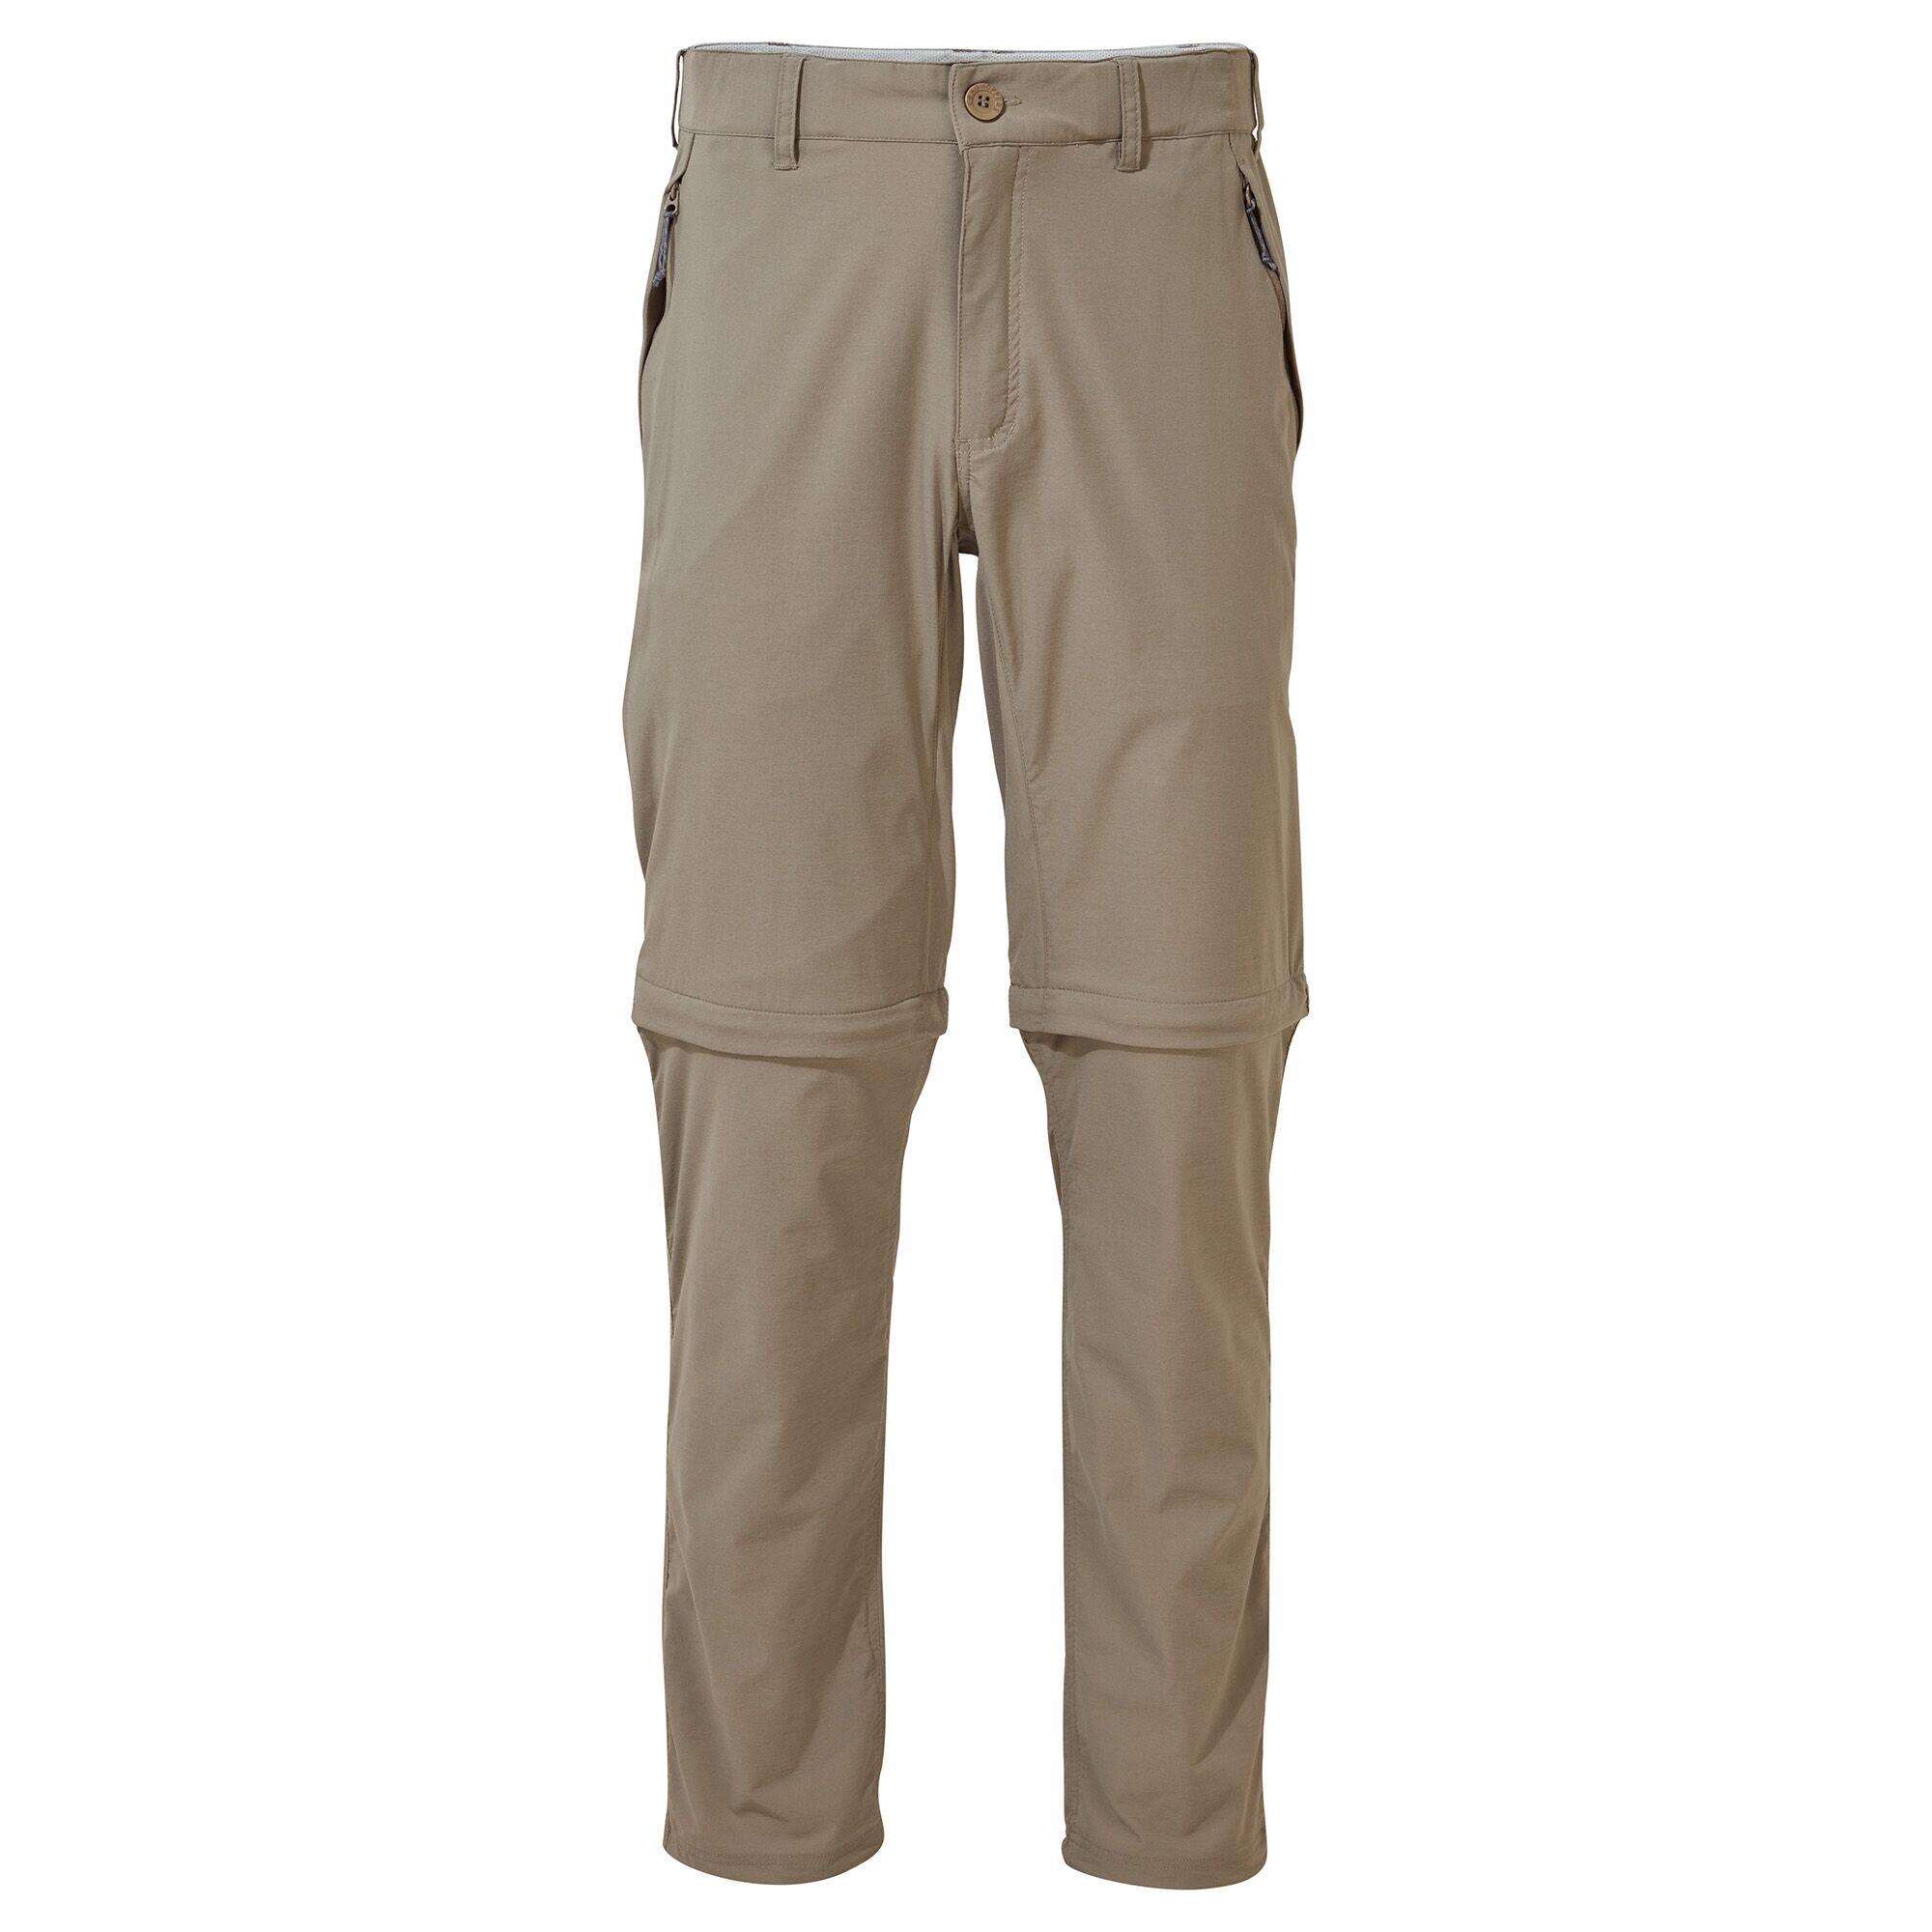 CRAGHOPPERS Men's NosiLife Pro Convertible II Trousers